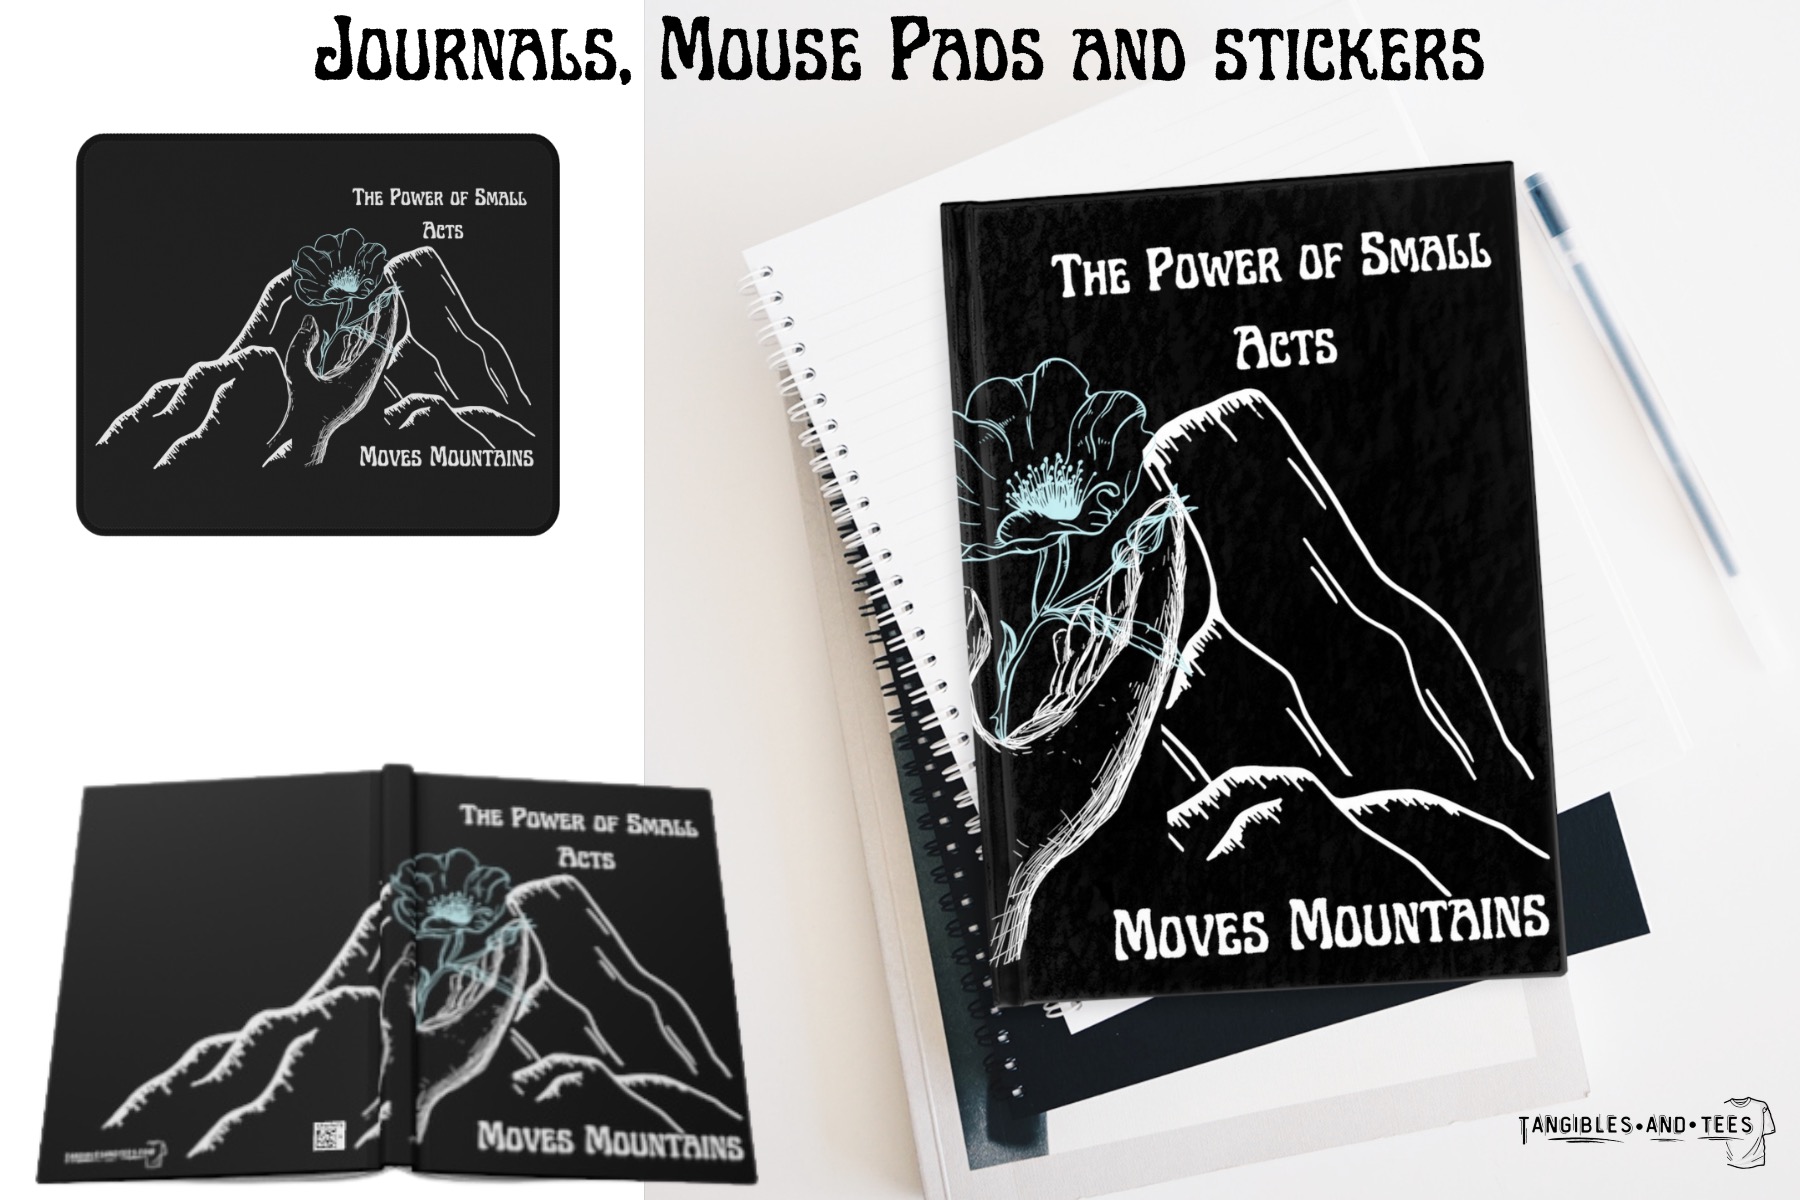 9-Journal-Mouse Pads-Stickers-Small Acts 2_9_11zon